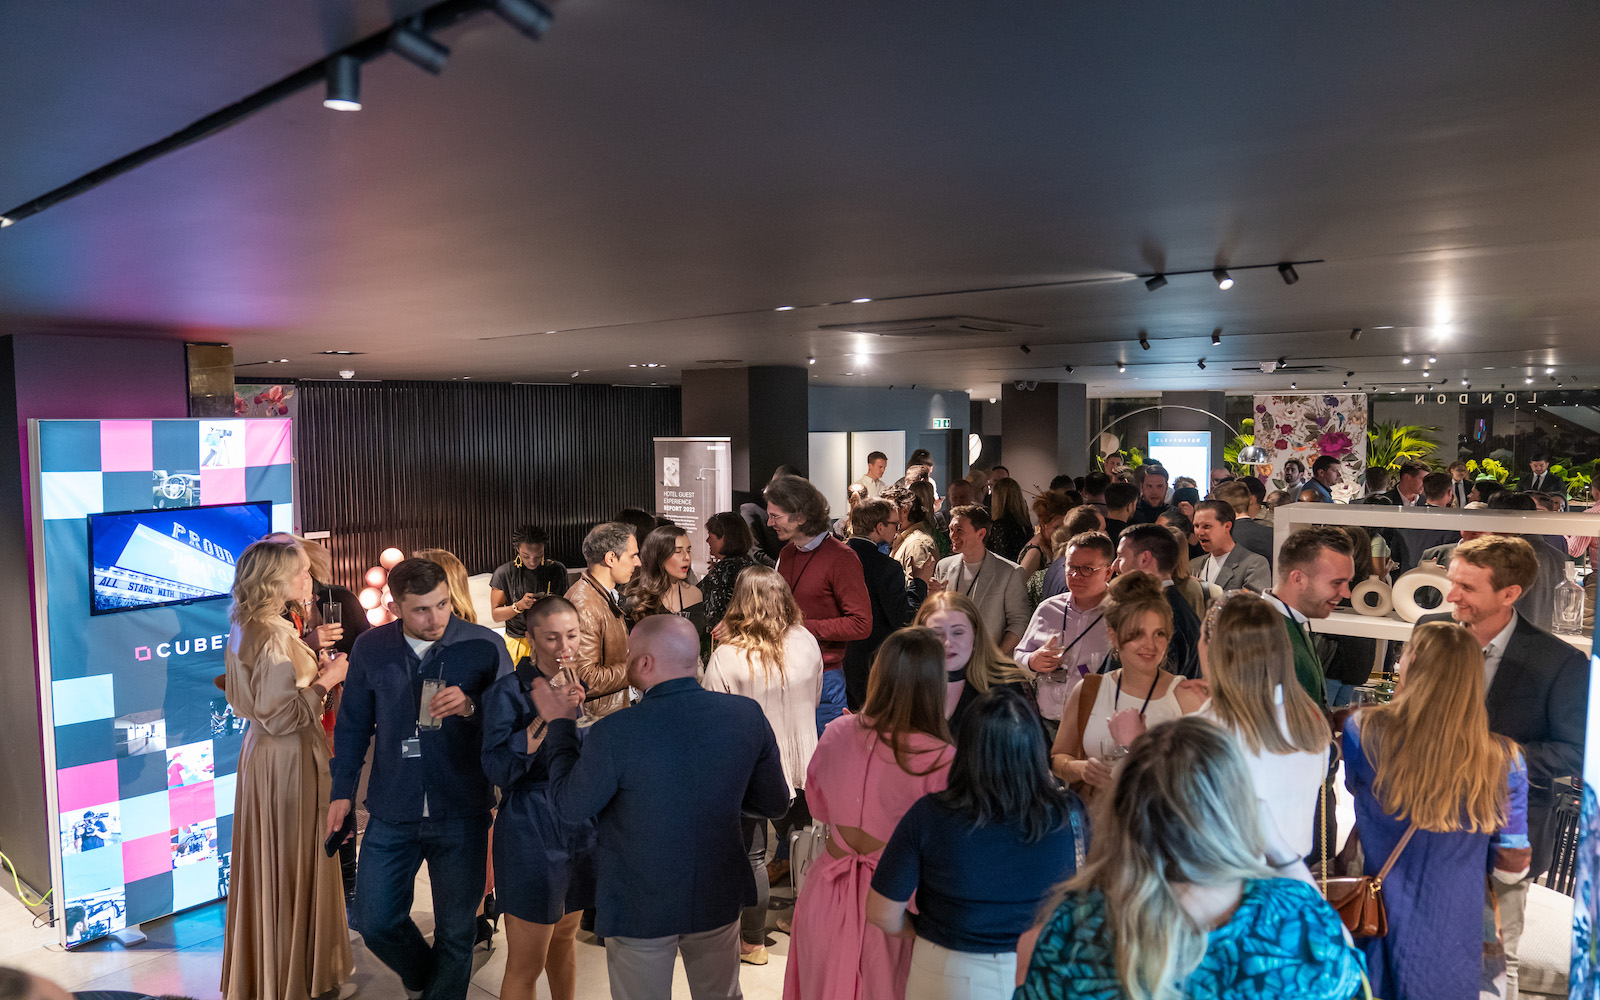 Crowd at Minotti London for MEET UP London 2022